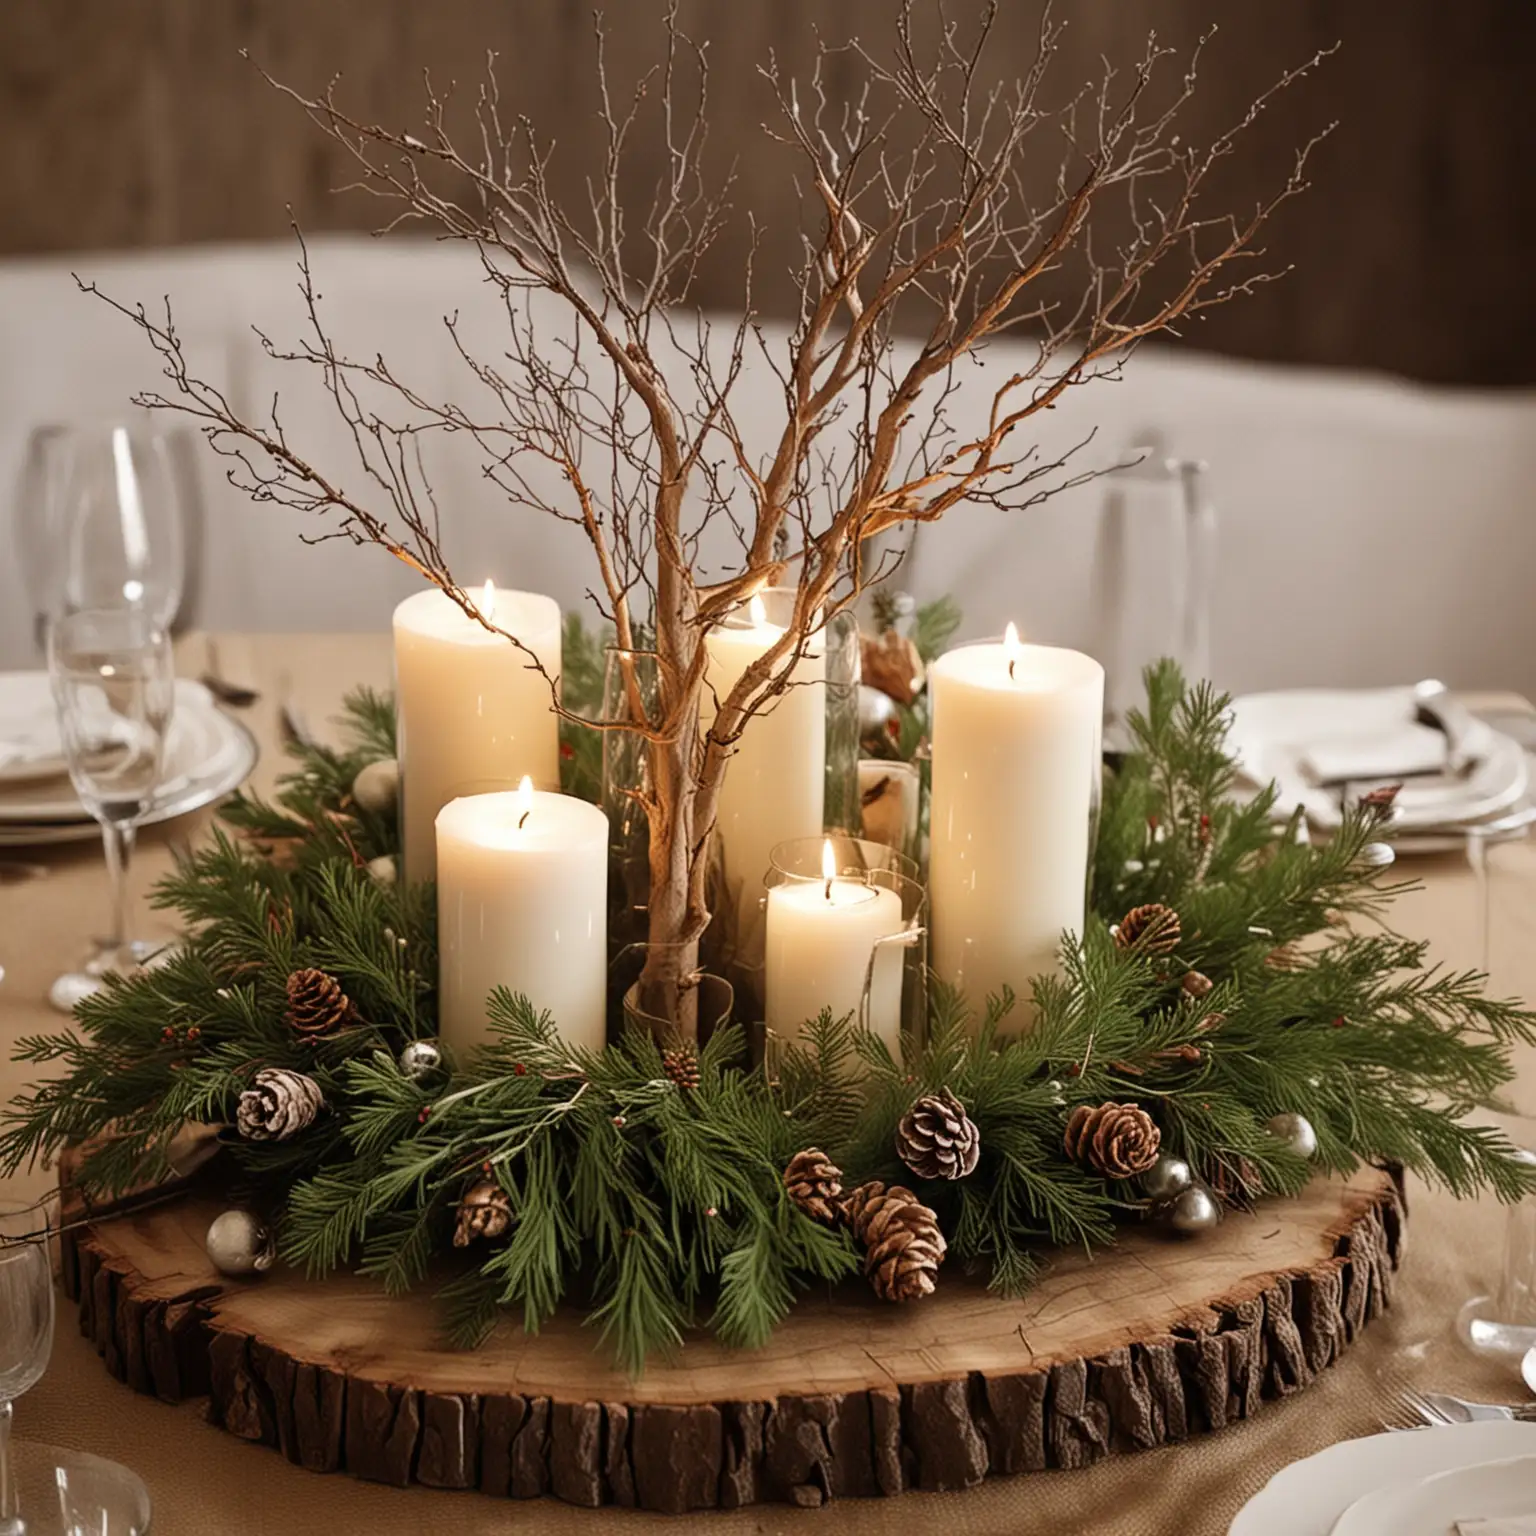 Rustic-Winter-Wedding-Centerpiece-with-Natural-Branches